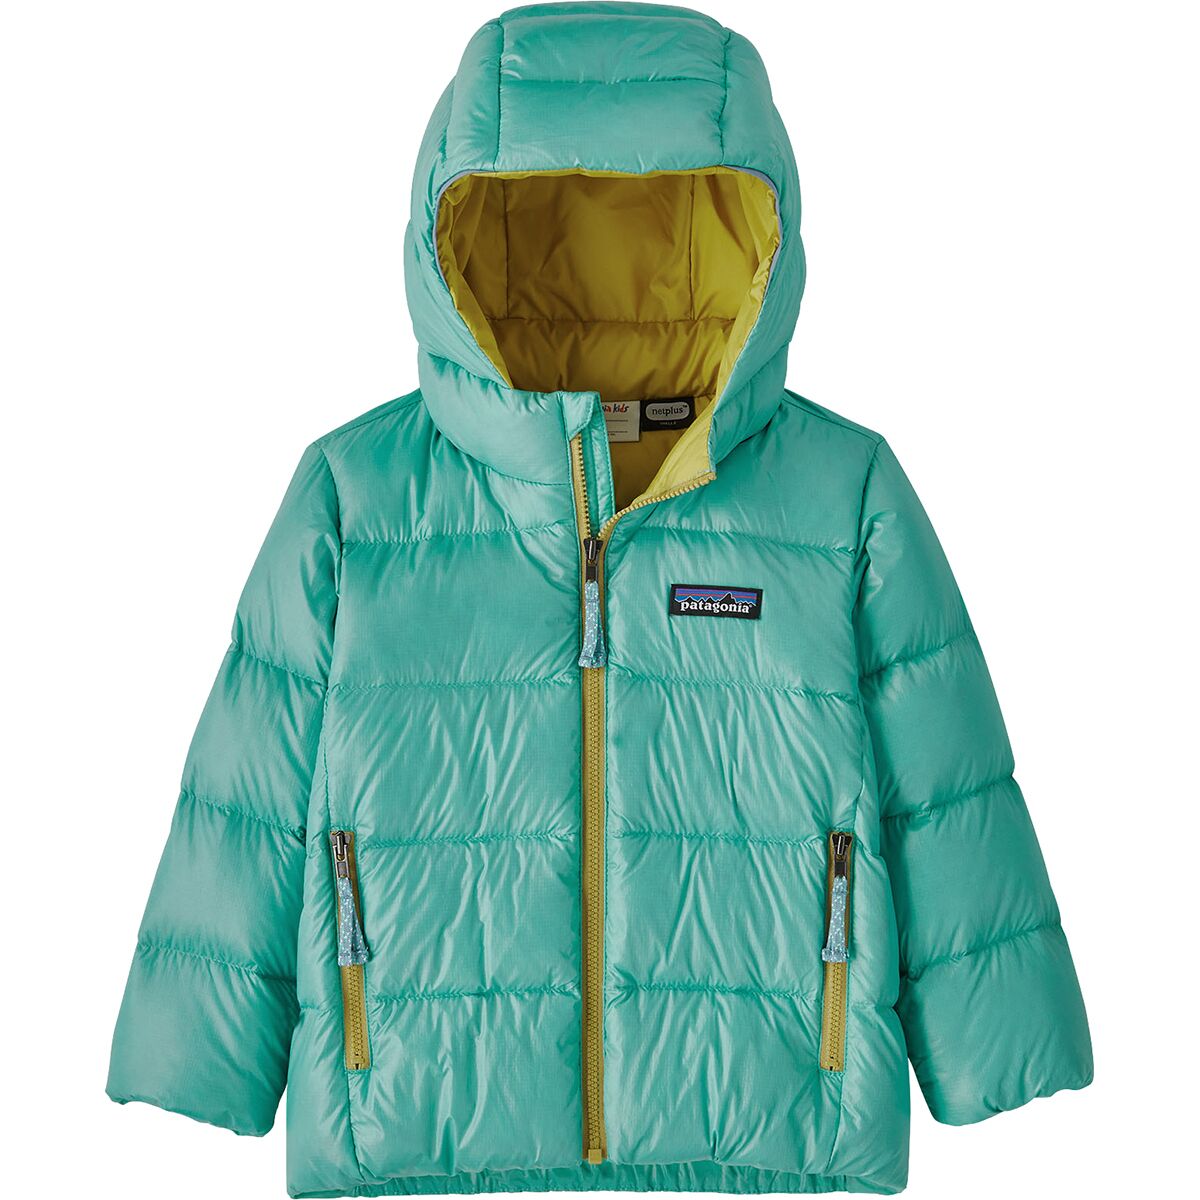 Patagonia Toddler Boys' Jackets | Backcountry.com